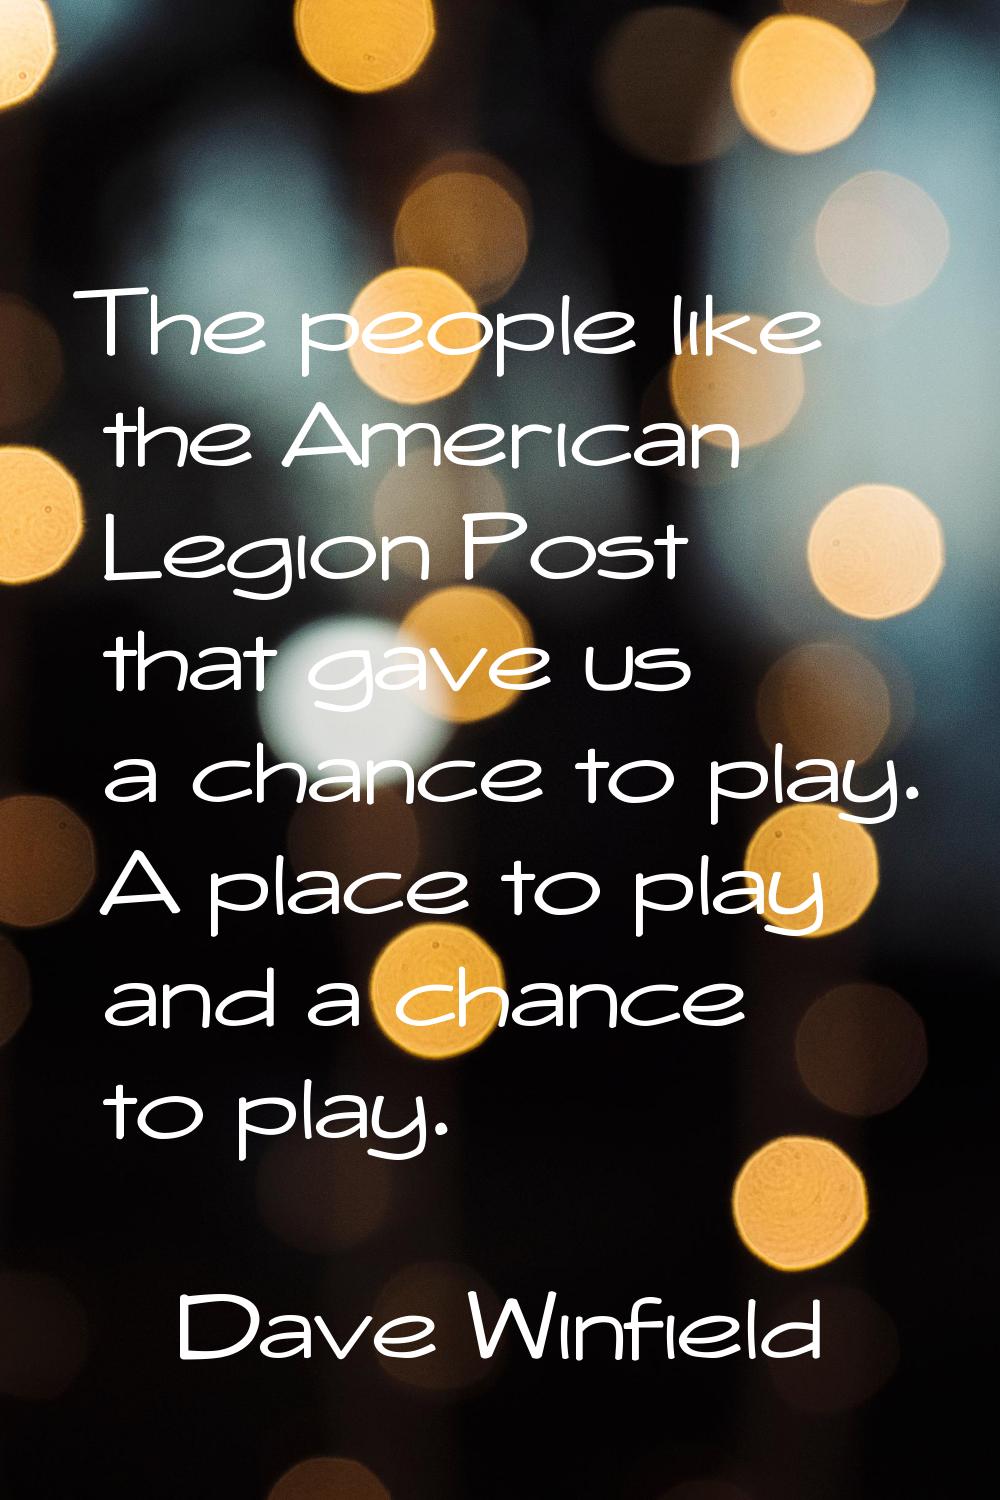 The people like the American Legion Post that gave us a chance to play. A place to play and a chanc